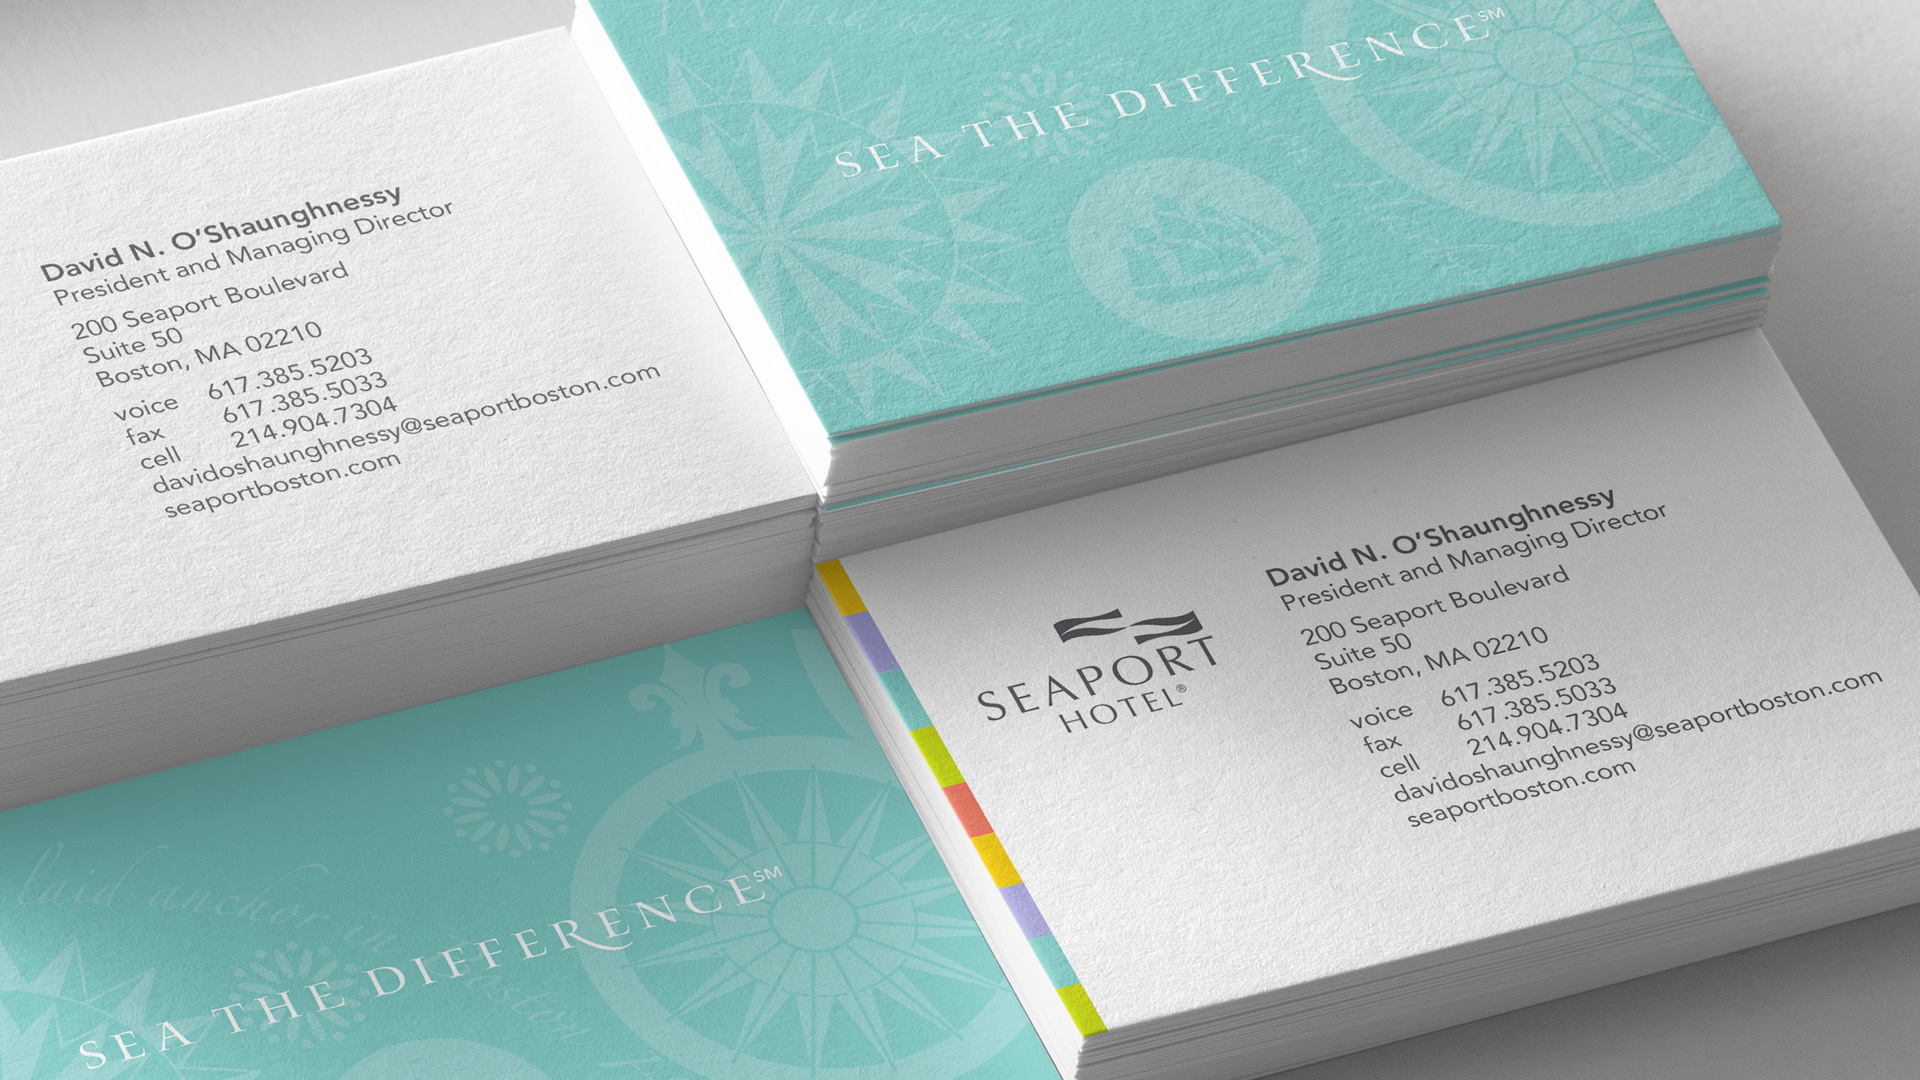 Seaport Hotel business cards